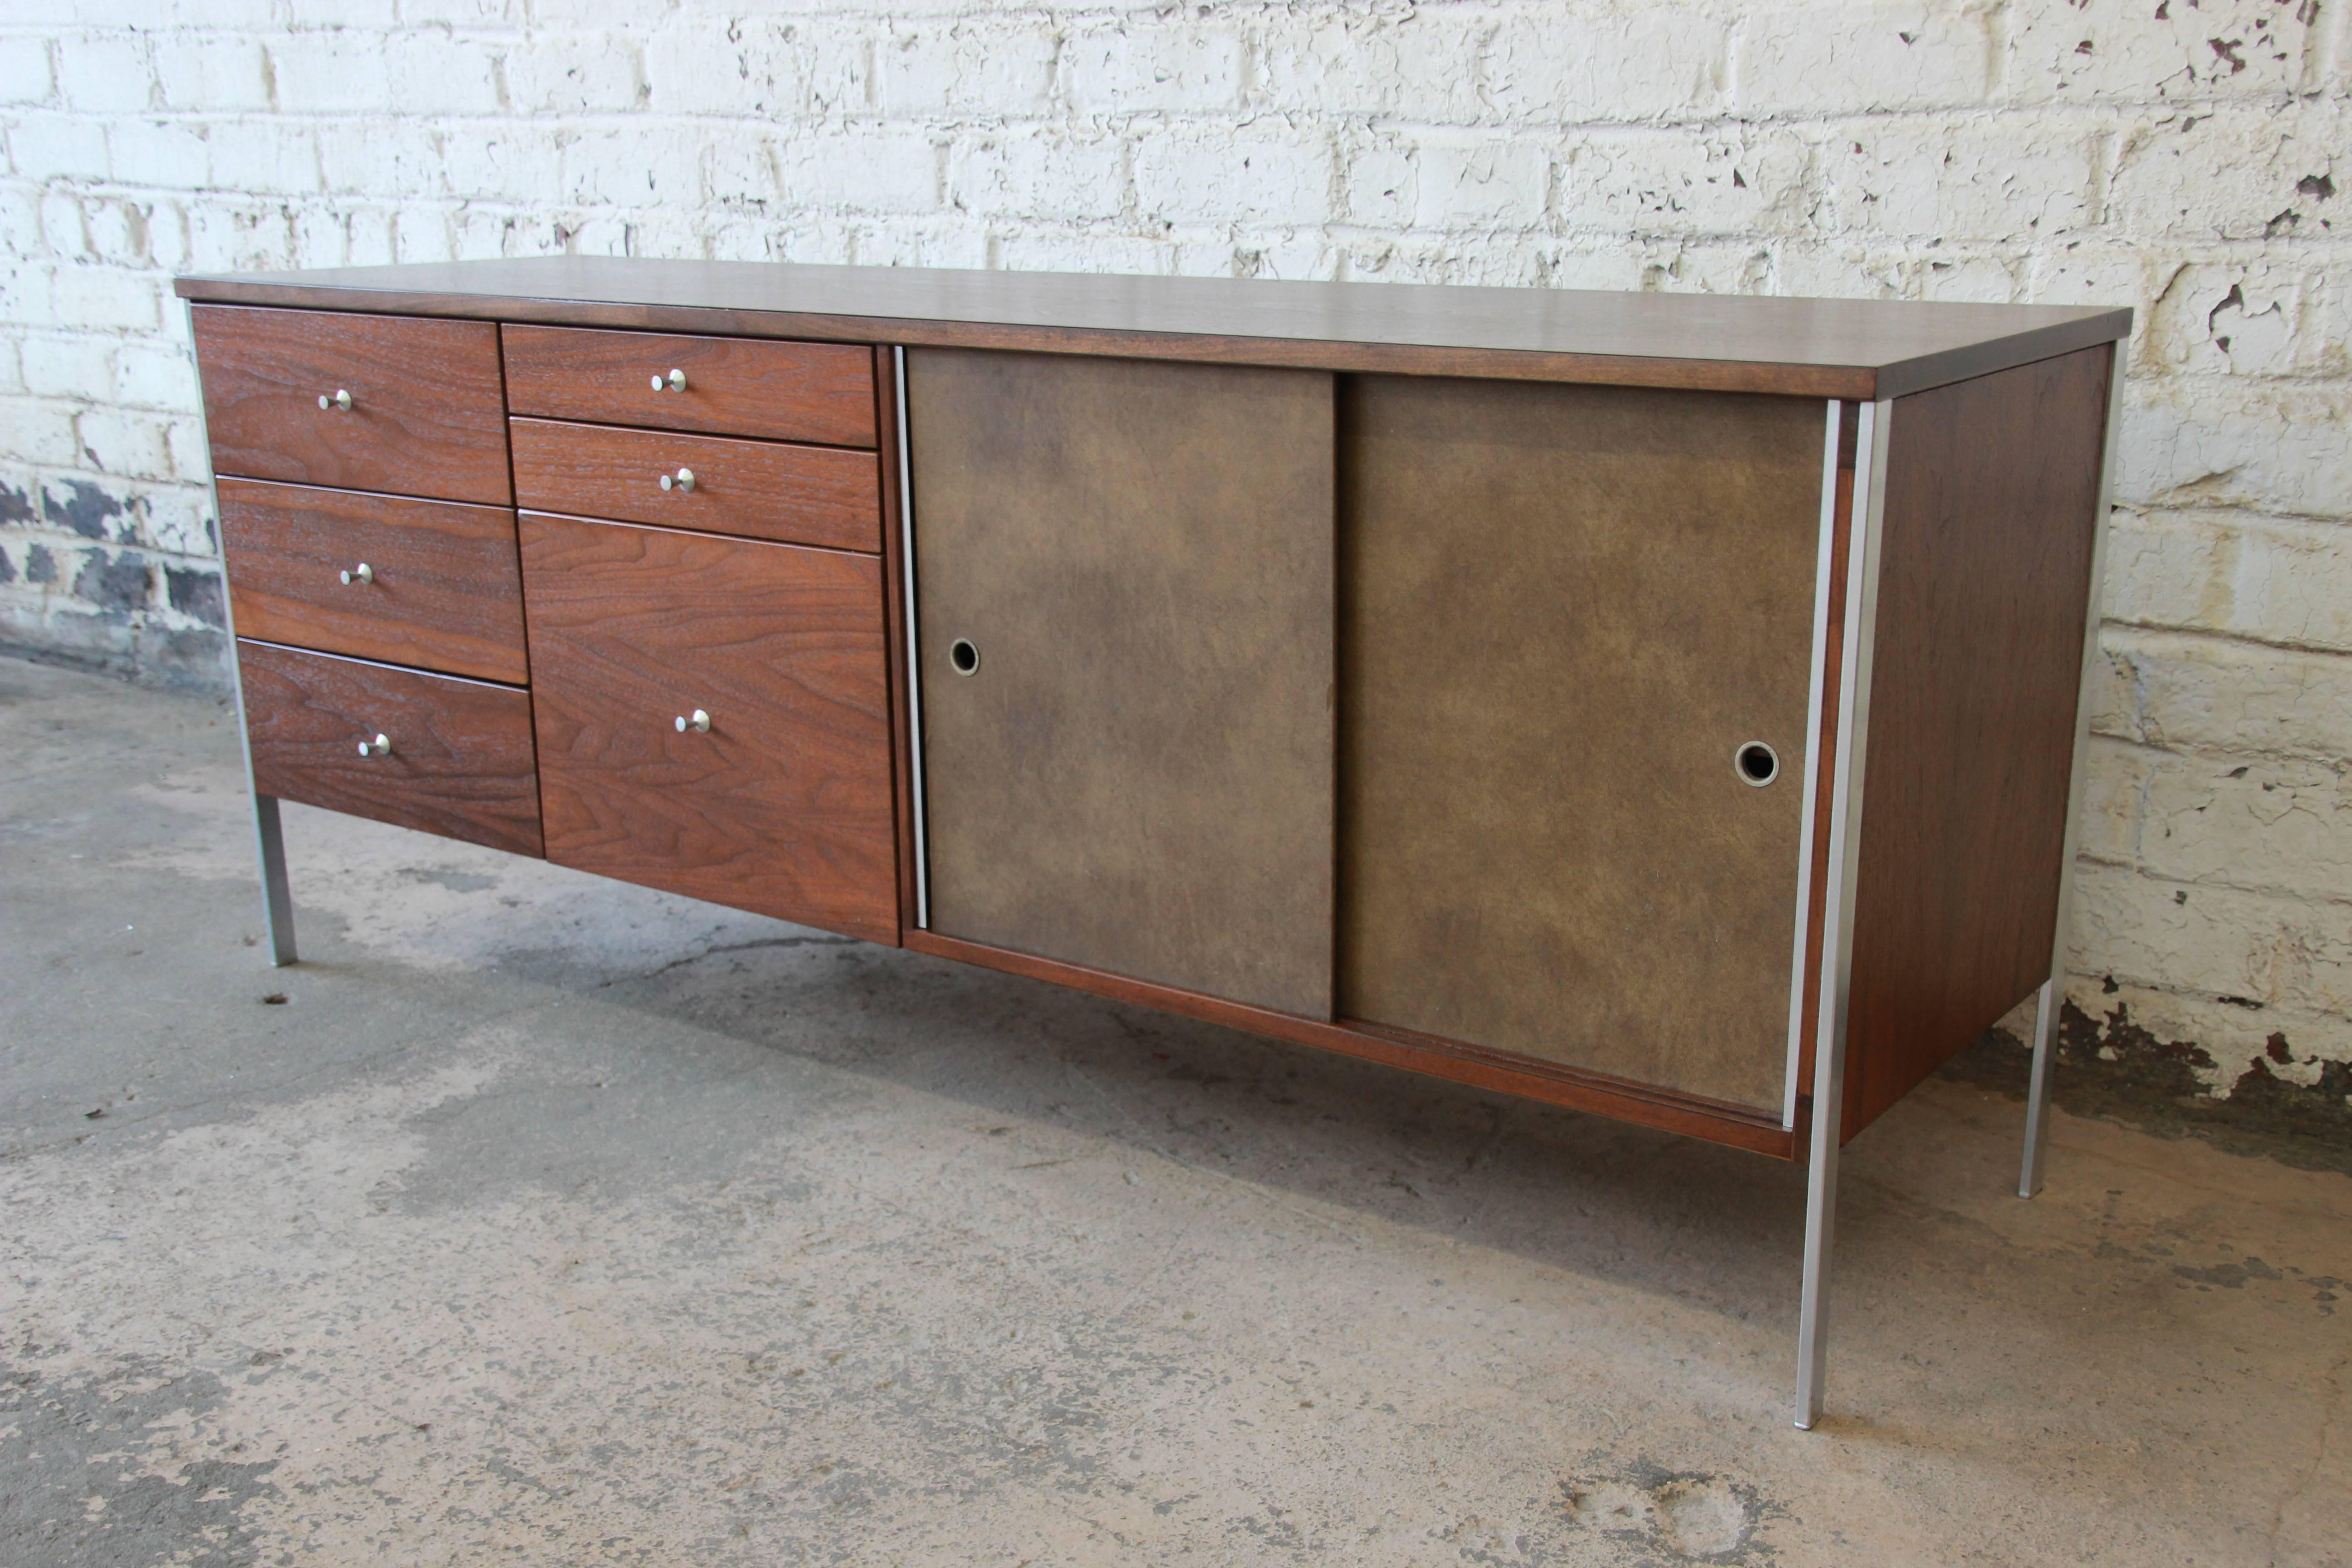 A rare and exceptional Mid-Century Modern walnut credenza designed by Paul McCobb for his 1957 Area Plan Units line. The credenza features gorgeous walnut wood grain and sleek aluminium legs. To the left are six drawers of various sizes, with